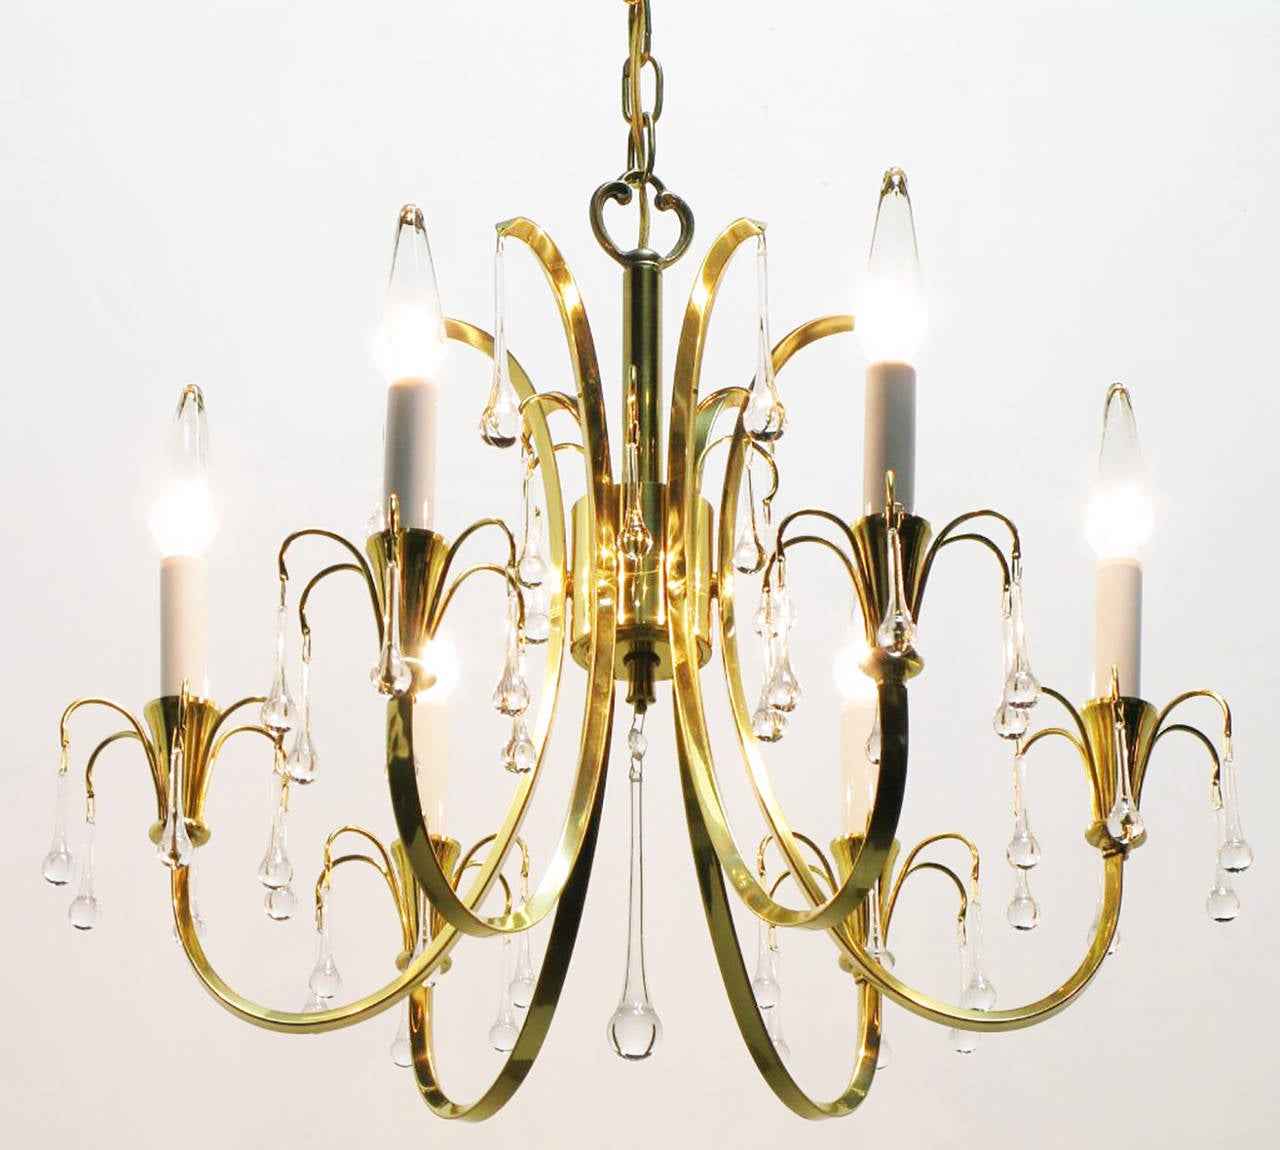 Modernist crystal chandelier with six C-curve arms and brass end cups. Raindrop crystals hang from every arm, with long center teardrop crystal. Sold with decorative chain and canopy.